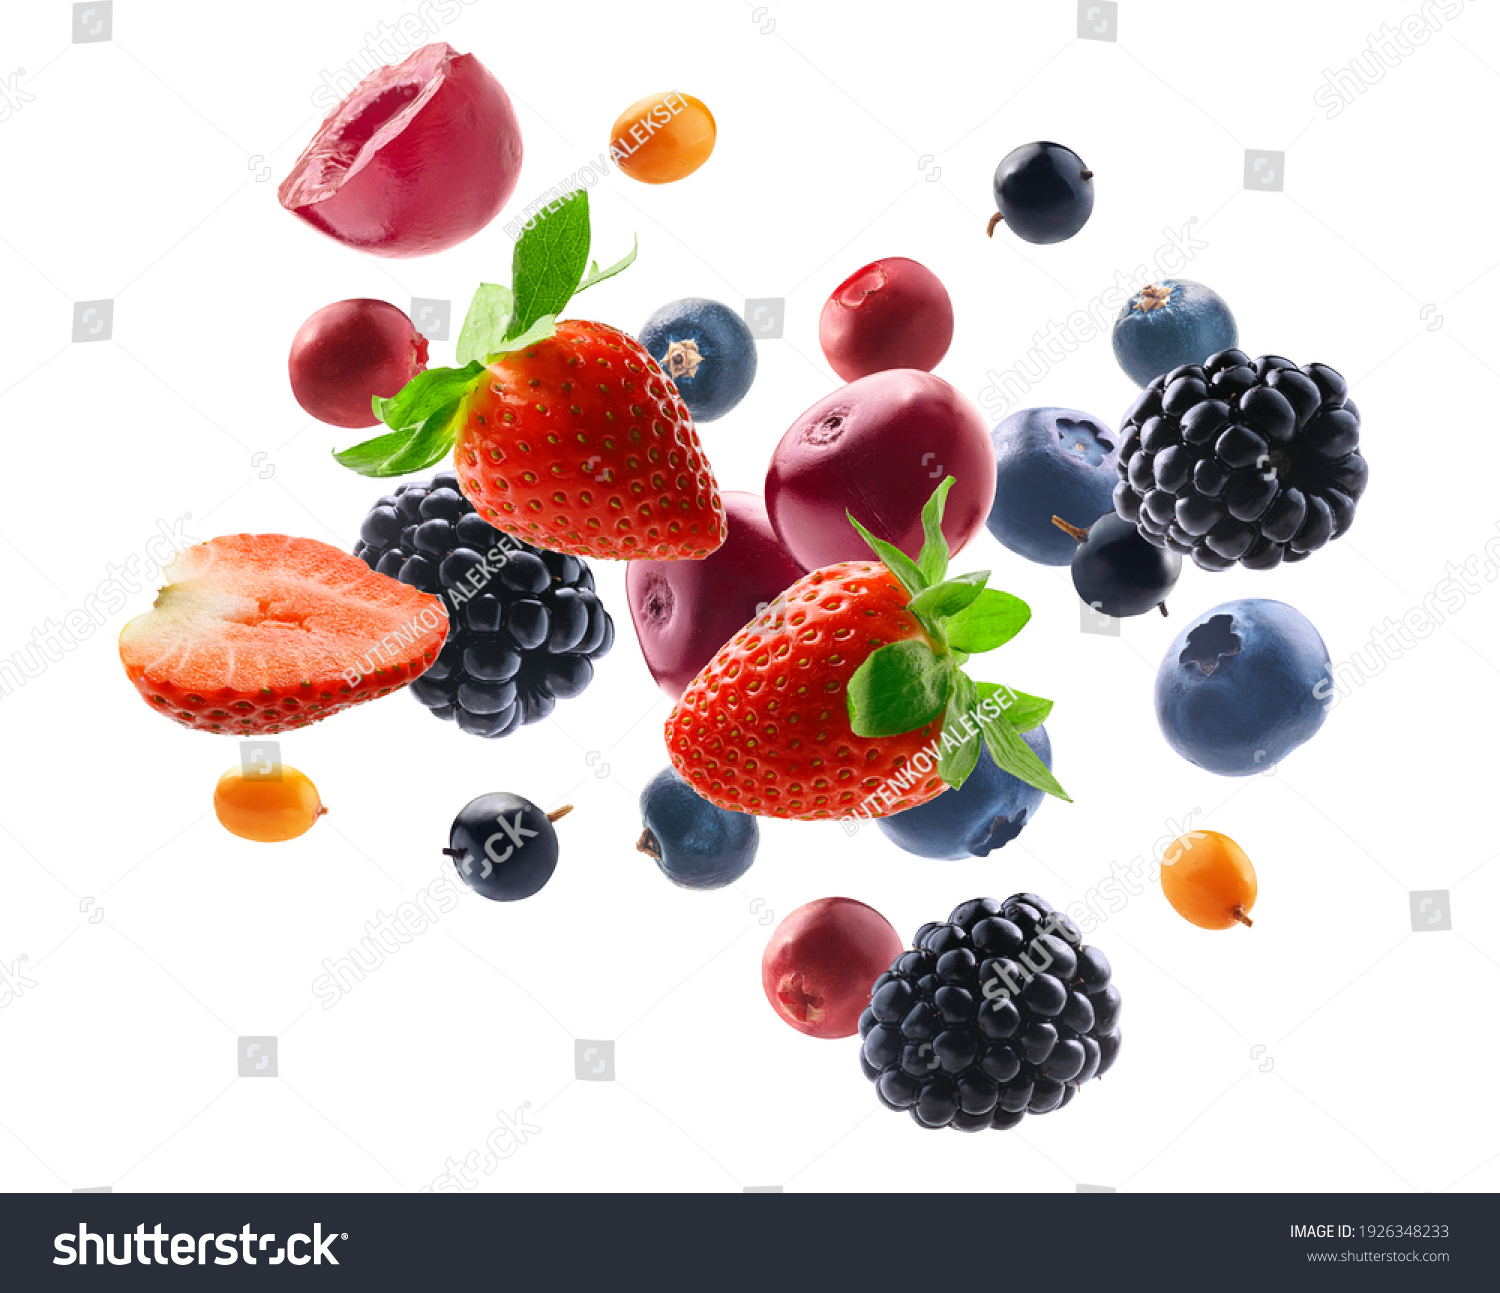 Many different berries in the form of a frame on a white background #1926348233